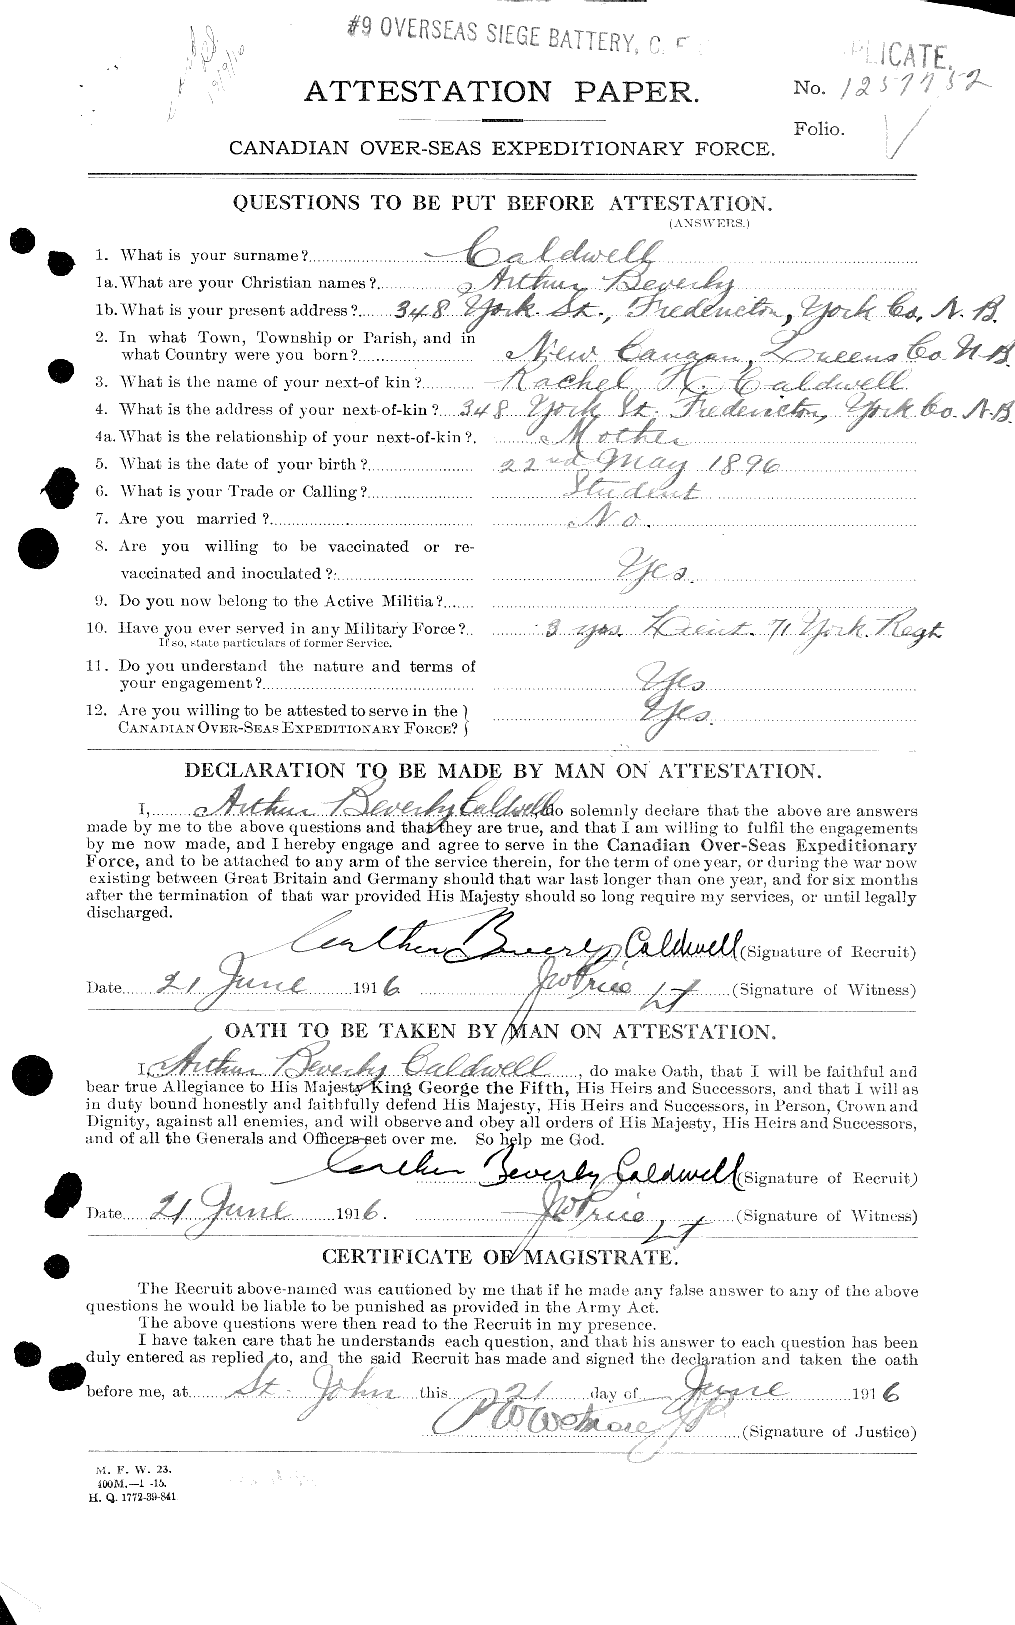 Personnel Records of the First World War - CEF 001861a